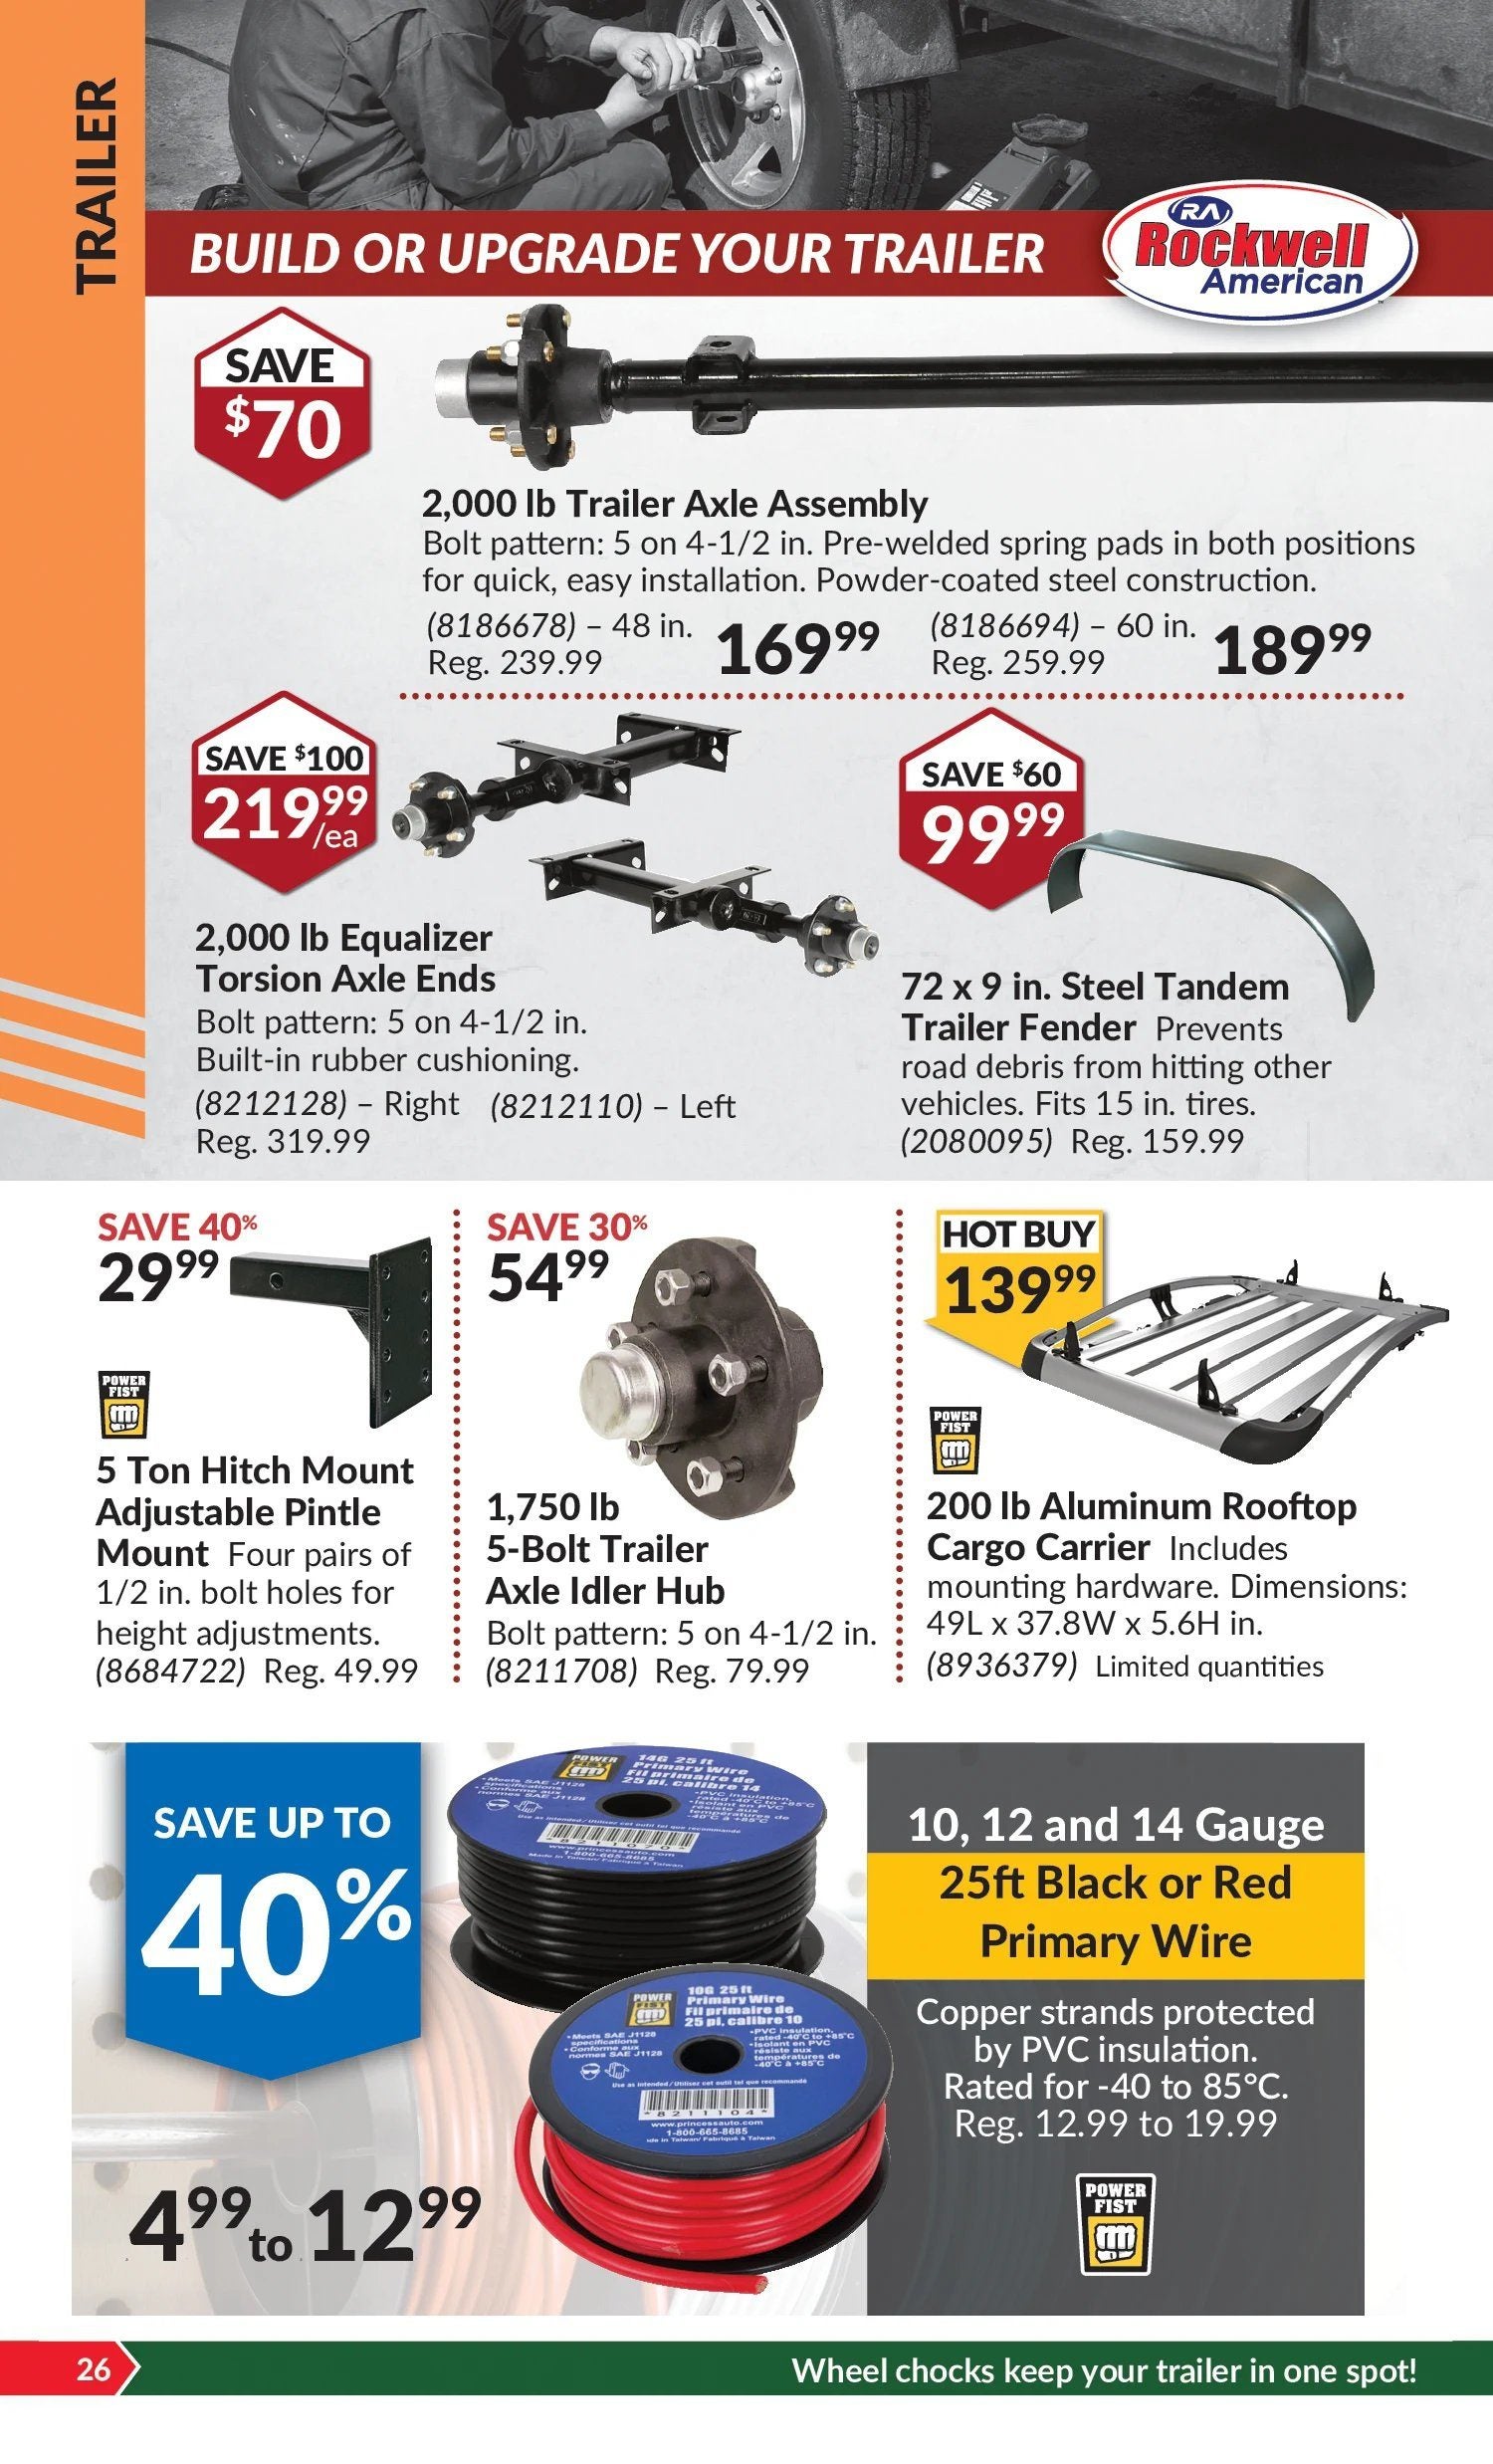 Princess Auto Weekly Flyer - 2 Week Sale - 'Tis The Season For